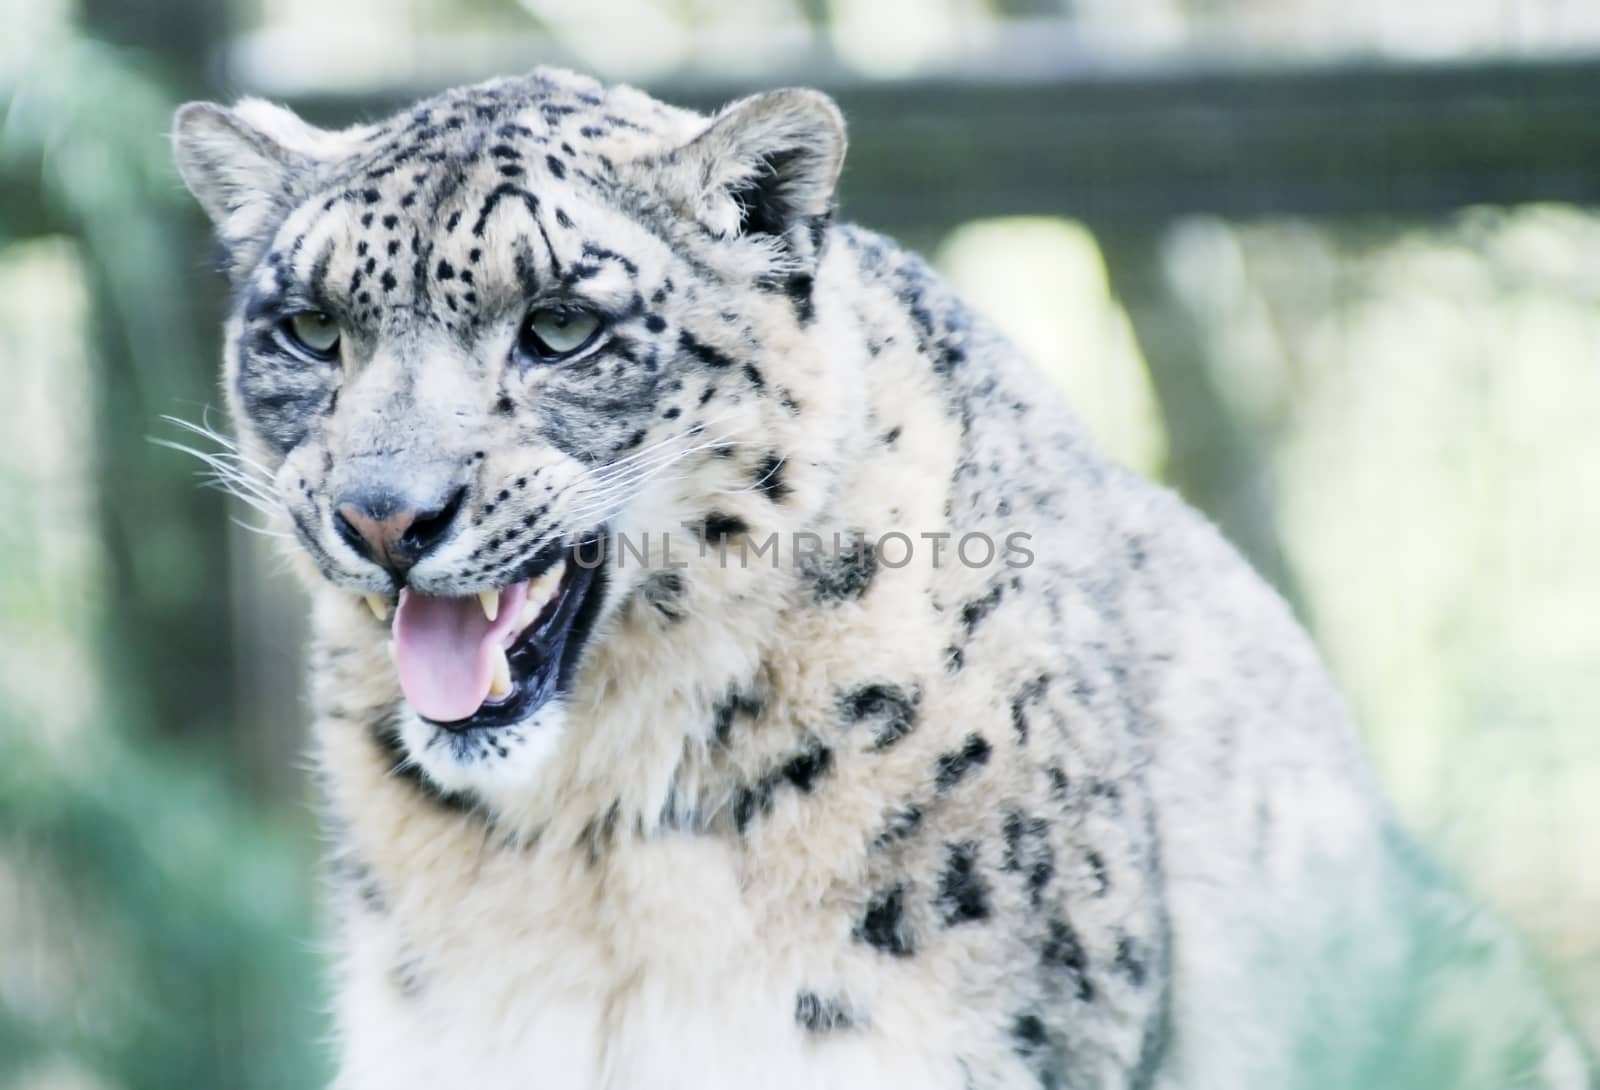 Closeup of snow leopard showing teeth and fur details